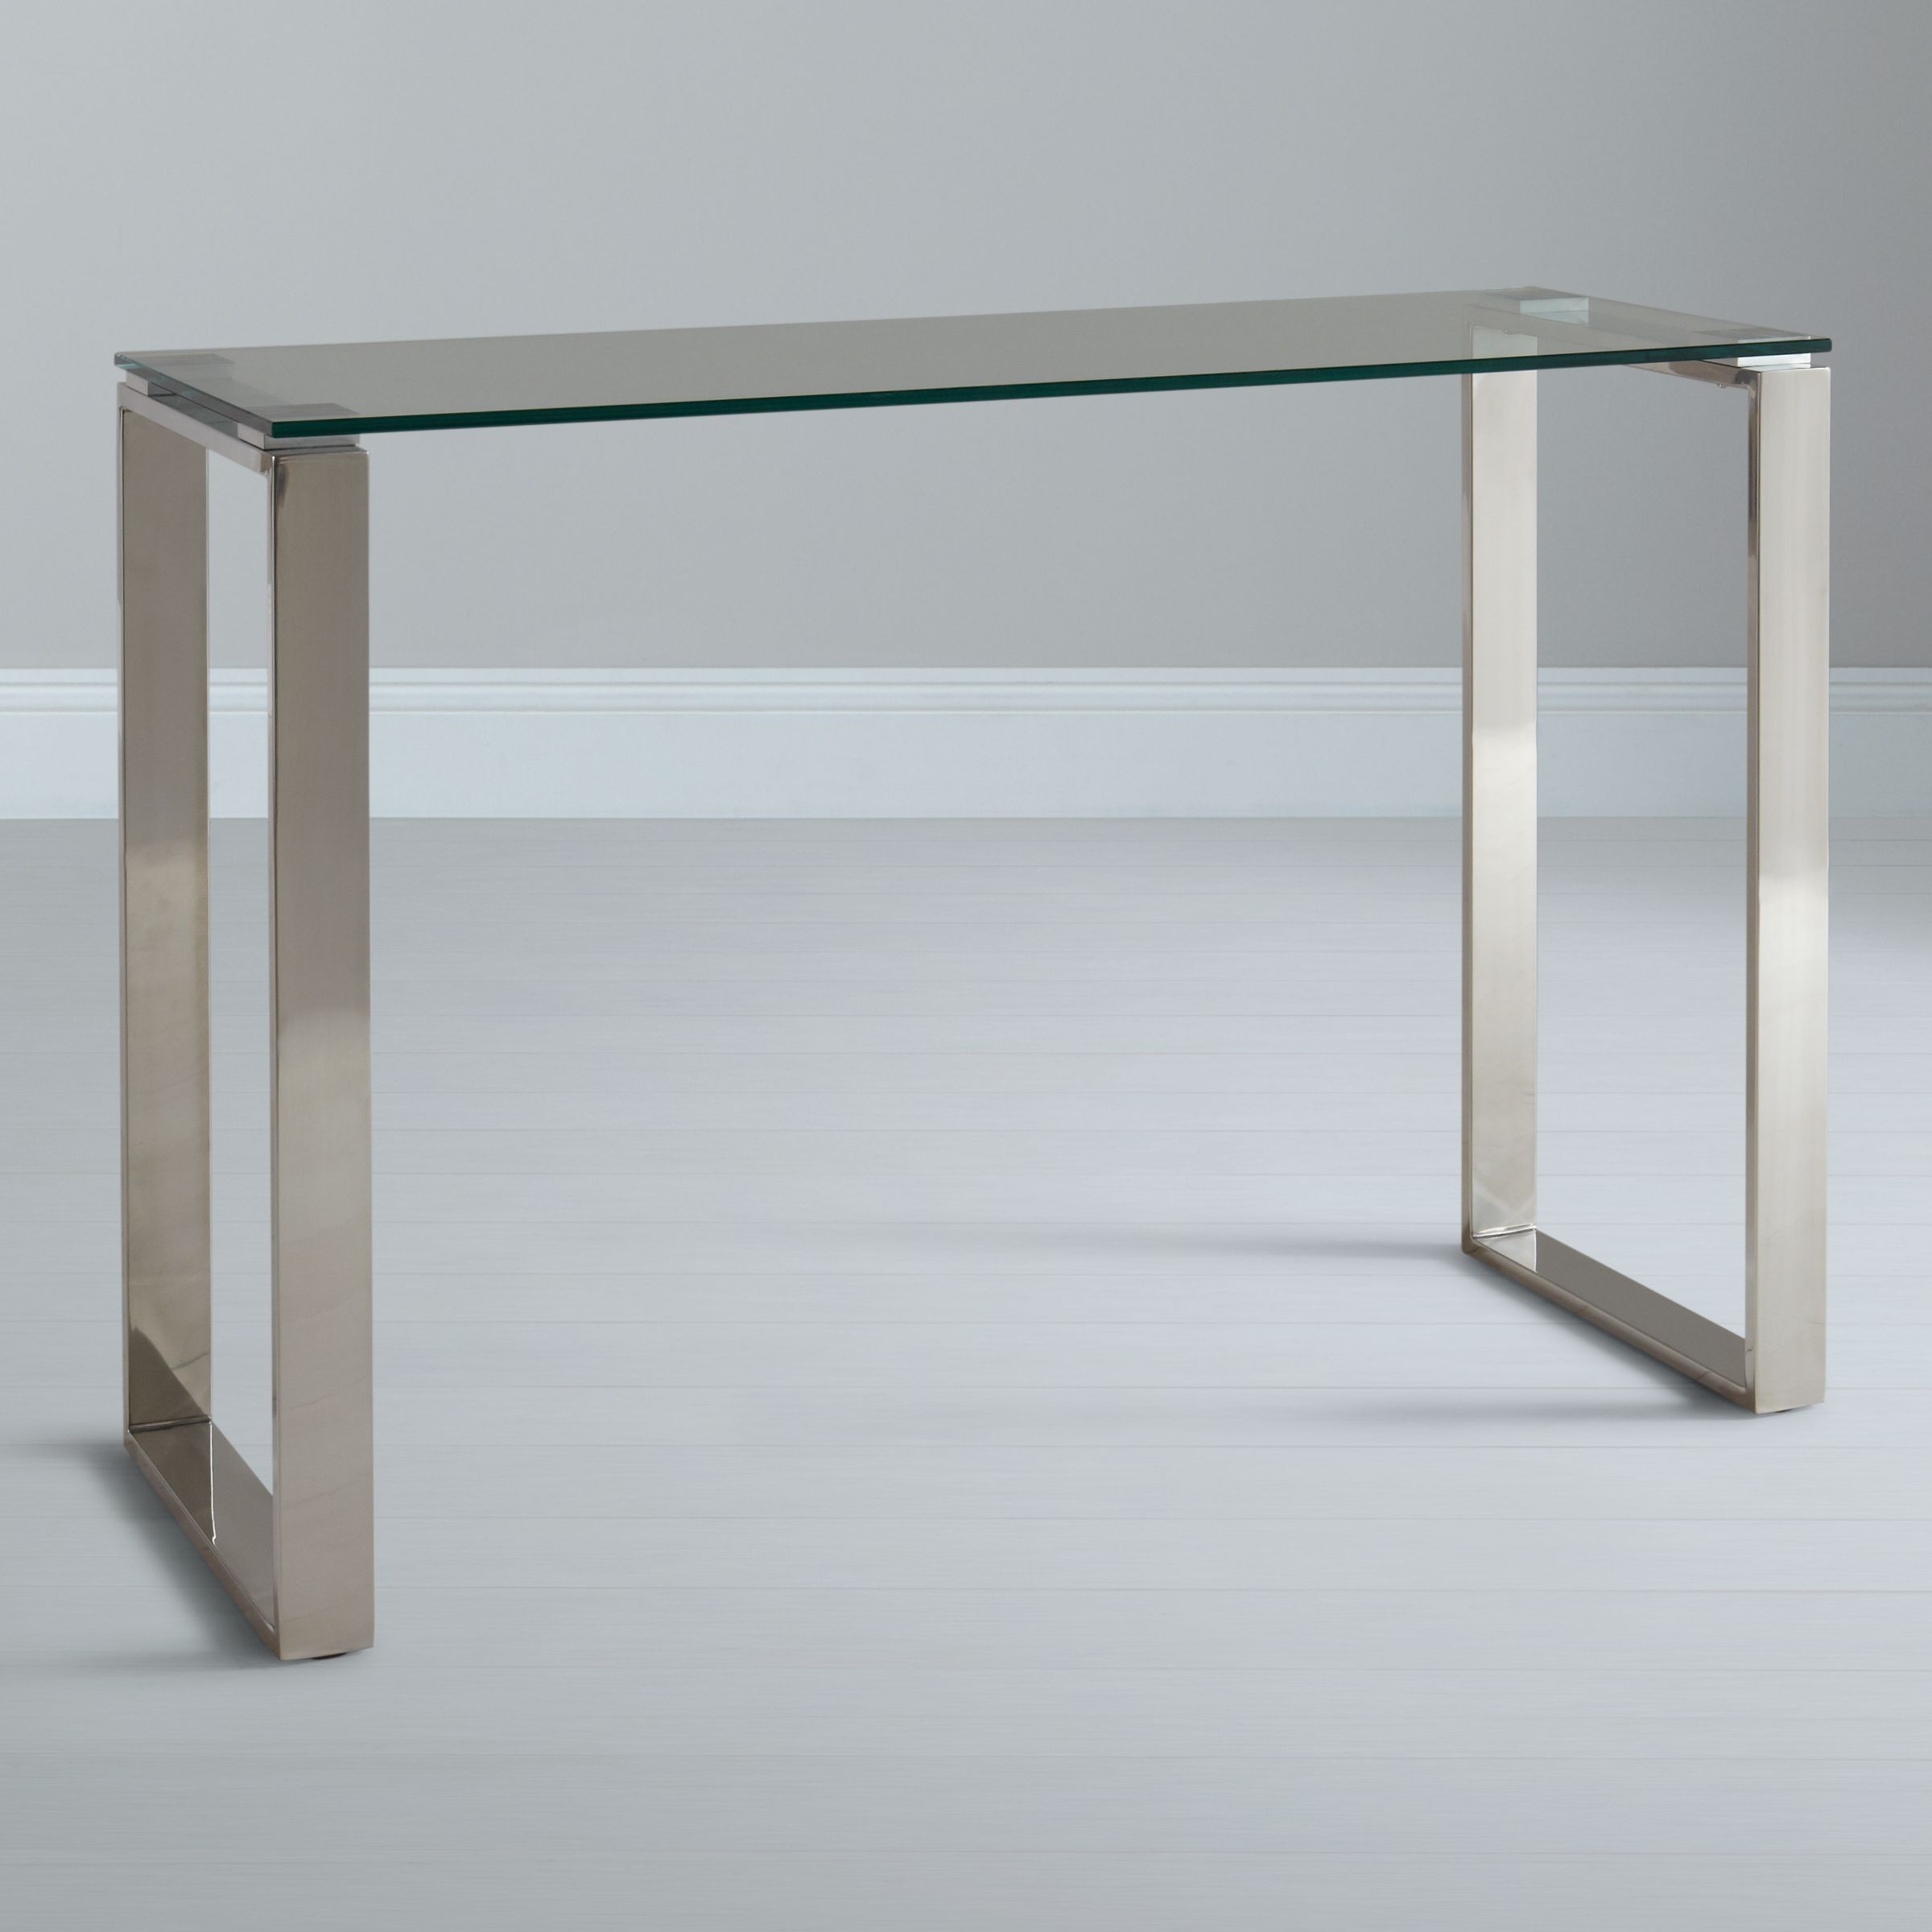 John Lewis Frost Console Table at JohnLewis